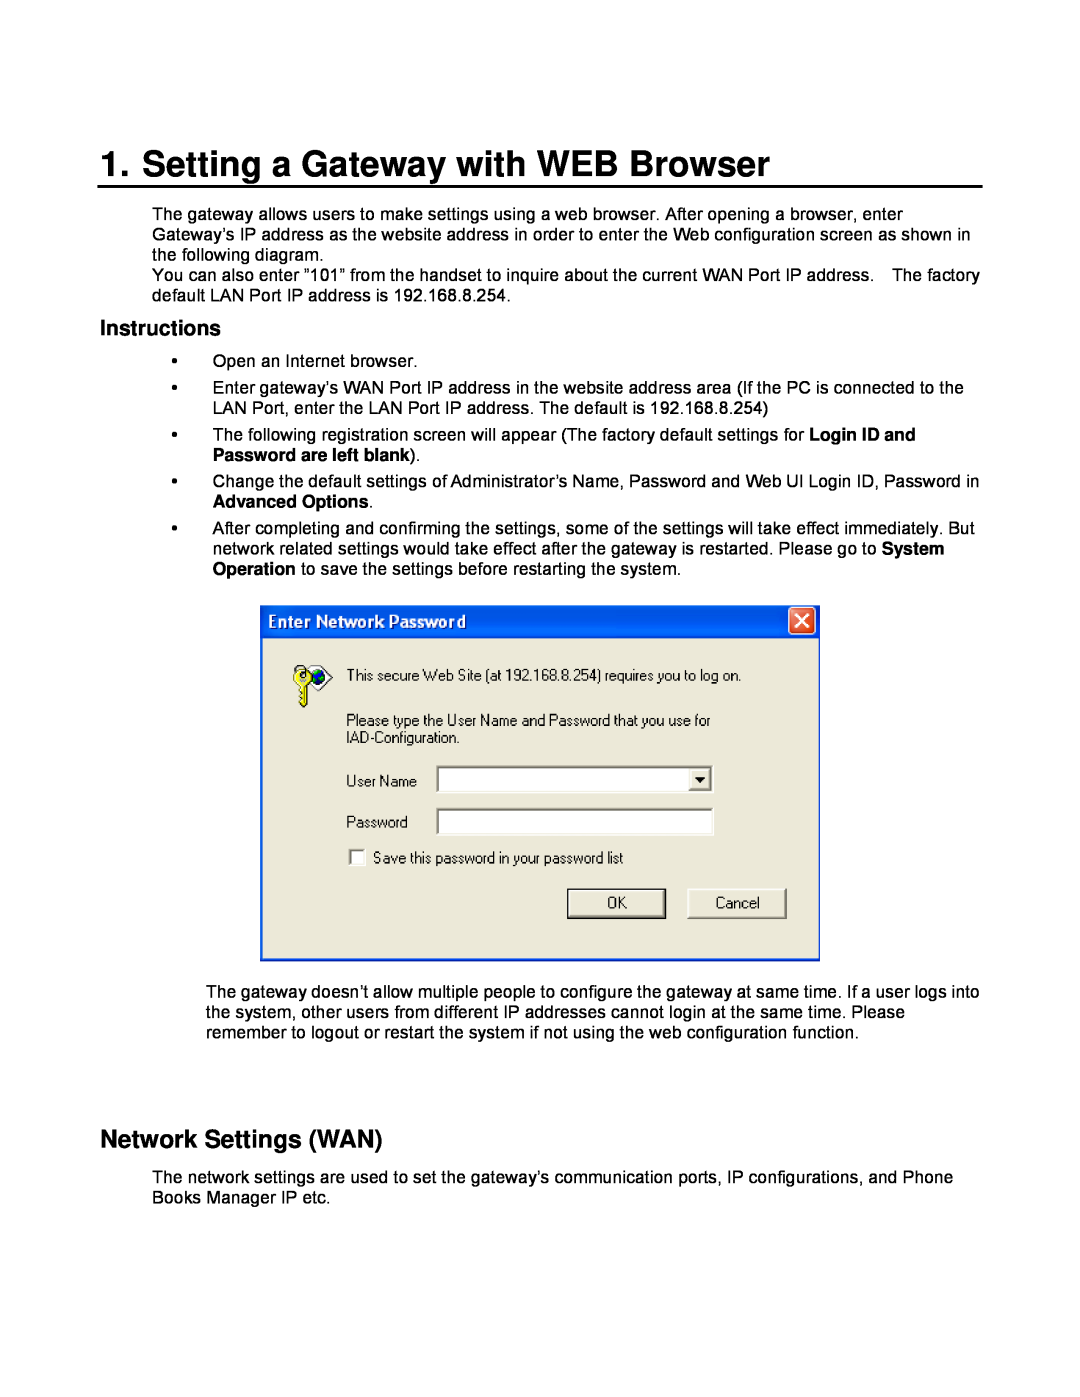 D-Link DVG-2032S user manual Setting a Gateway with WEB Browser, Network Settings WAN, Instructions 